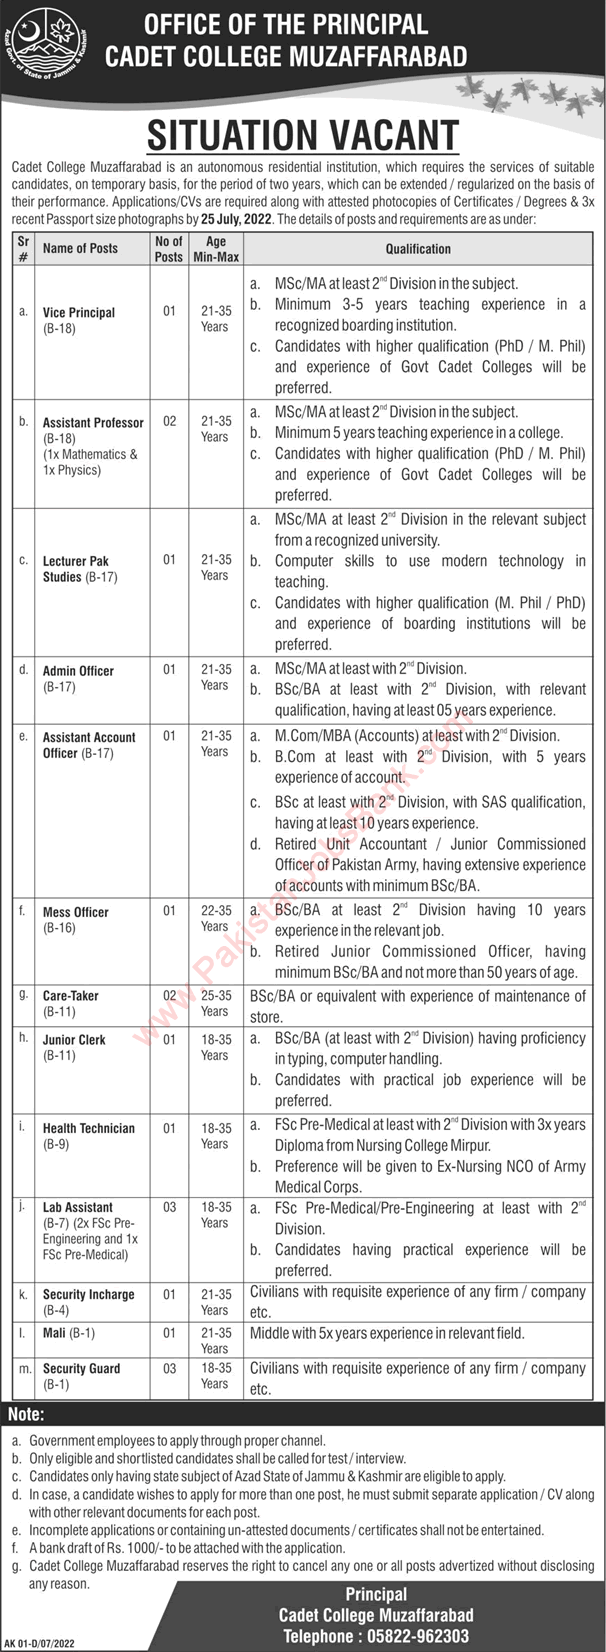 Cadet College Muzaffarabad Jobs 2022 July Lab Assistant, Security Guards & Others Latest